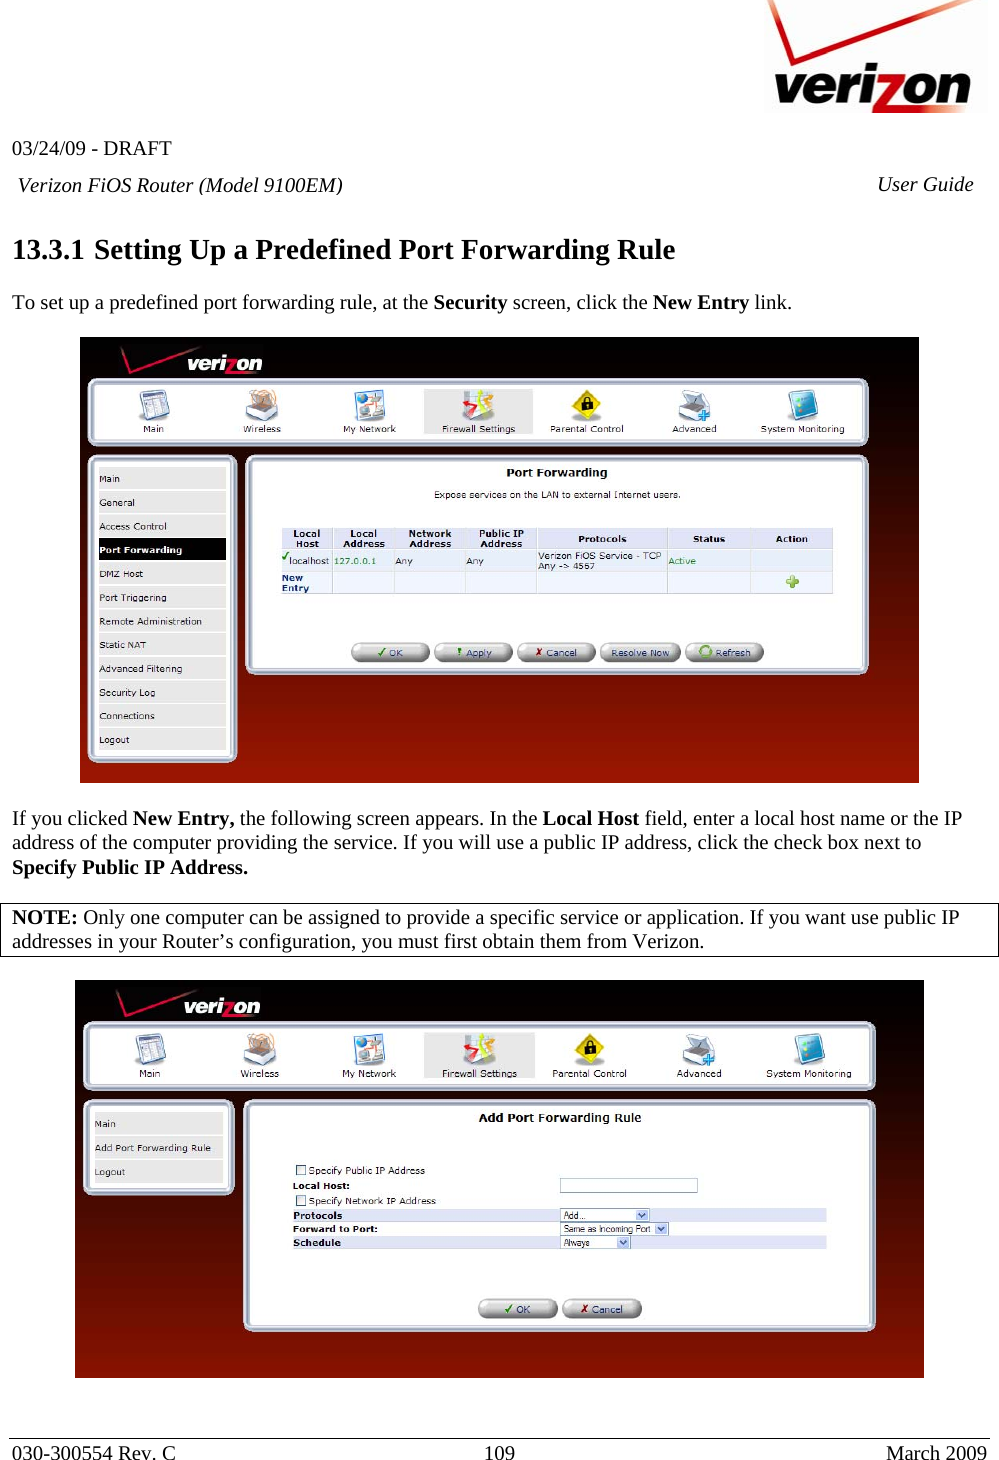   03/24/09 - DRAFT   030-300554 Rev. C  109      March 2009  Verizon FiOS Router (Model 9100EM) User Guide 13.3.1  Setting Up a Predefined Port Forwarding Rule  To set up a predefined port forwarding rule, at the Security screen, click the New Entry link.    If you clicked New Entry, the following screen appears. In the Local Host field, enter a local host name or the IP address of the computer providing the service. If you will use a public IP address, click the check box next to Specify Public IP Address.  NOTE: Only one computer can be assigned to provide a specific service or application. If you want use public IP addresses in your Router’s configuration, you must first obtain them from Verizon.      